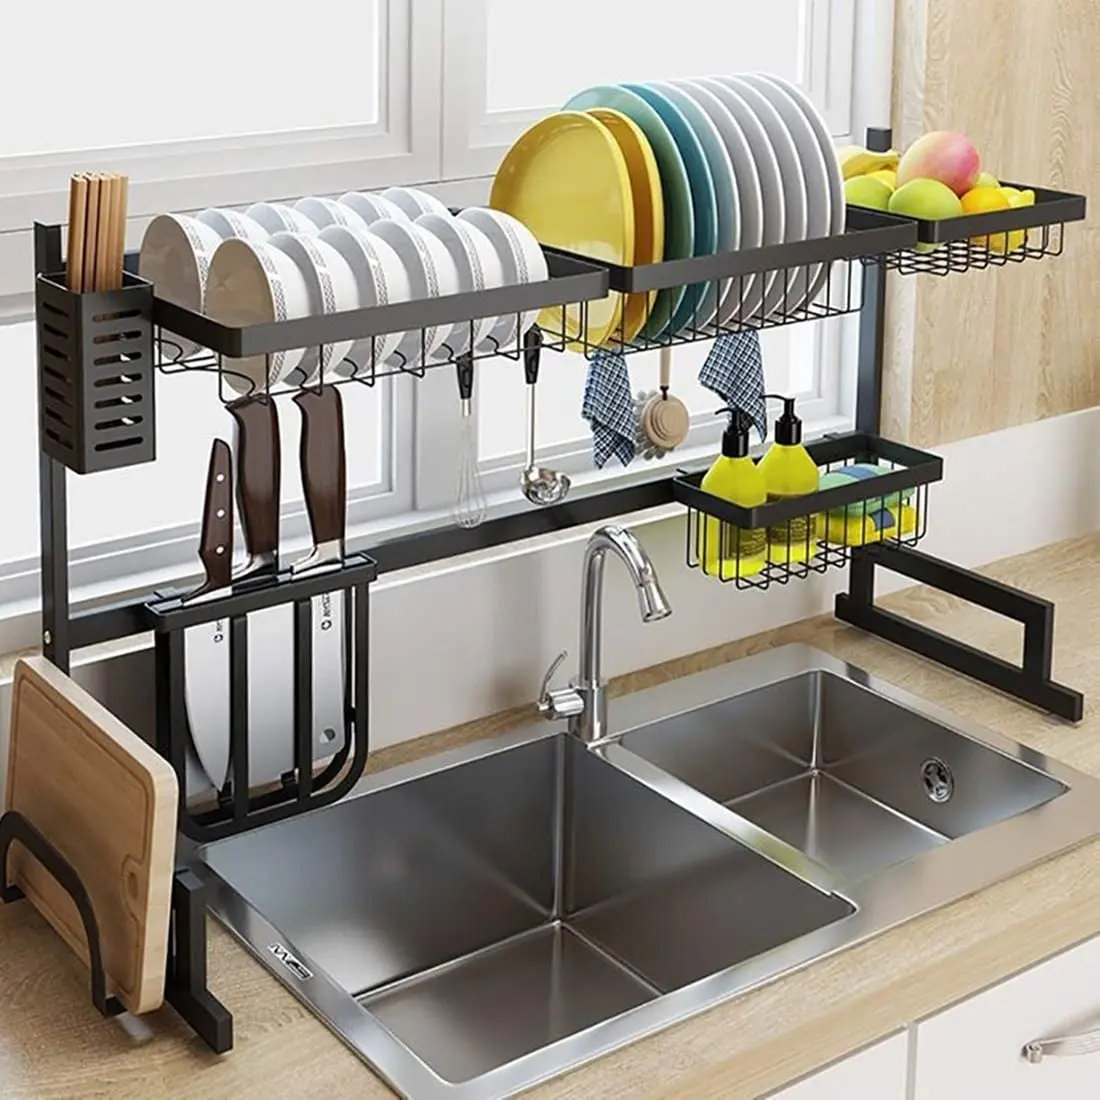 Over Sink Dish Drying Rack 2-Tier Stainless Steel Cutlery Drainer Kitchen Shelf